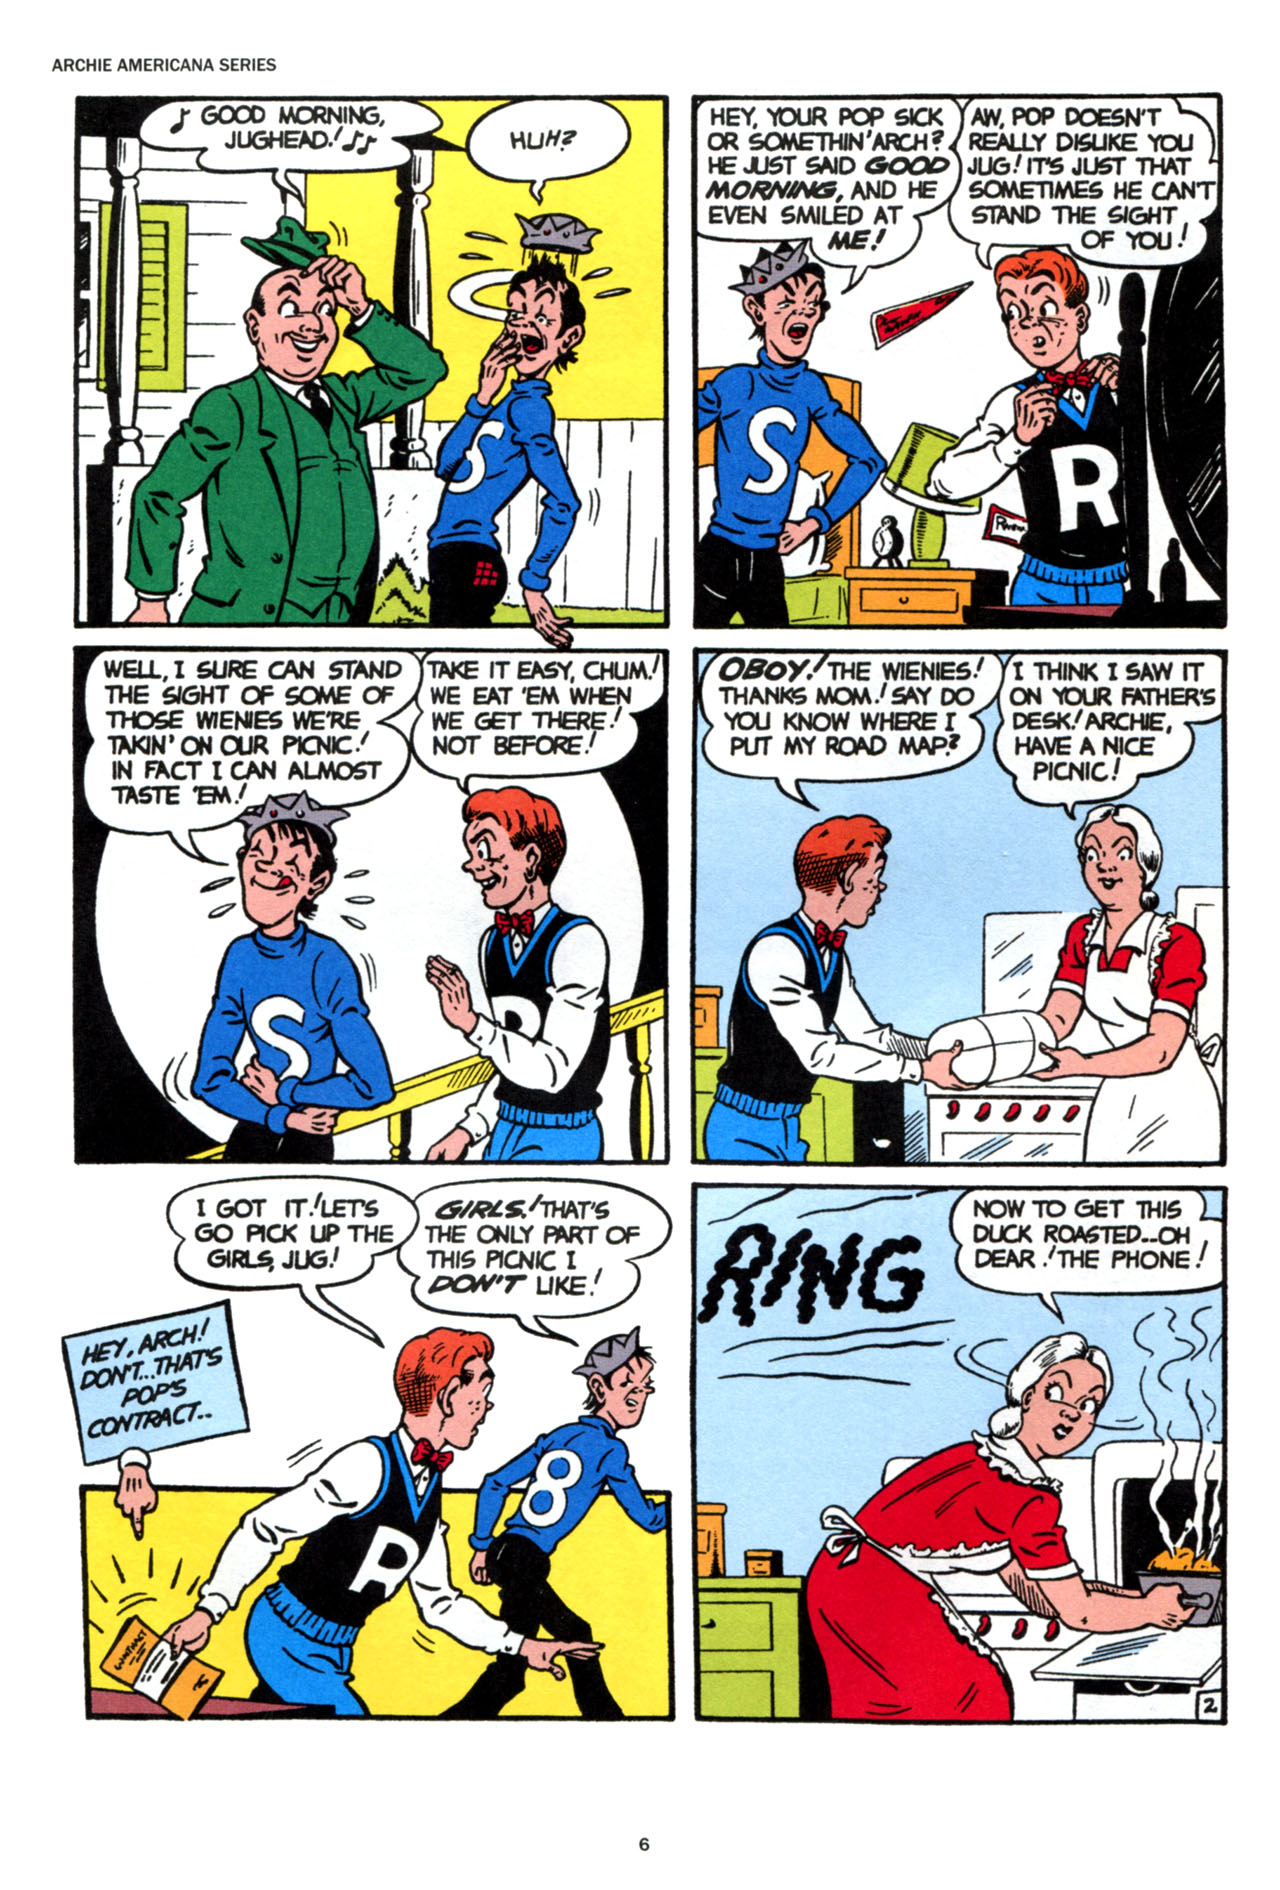 Read online Archie Americana Series comic -  Issue # TPB 6 - 7